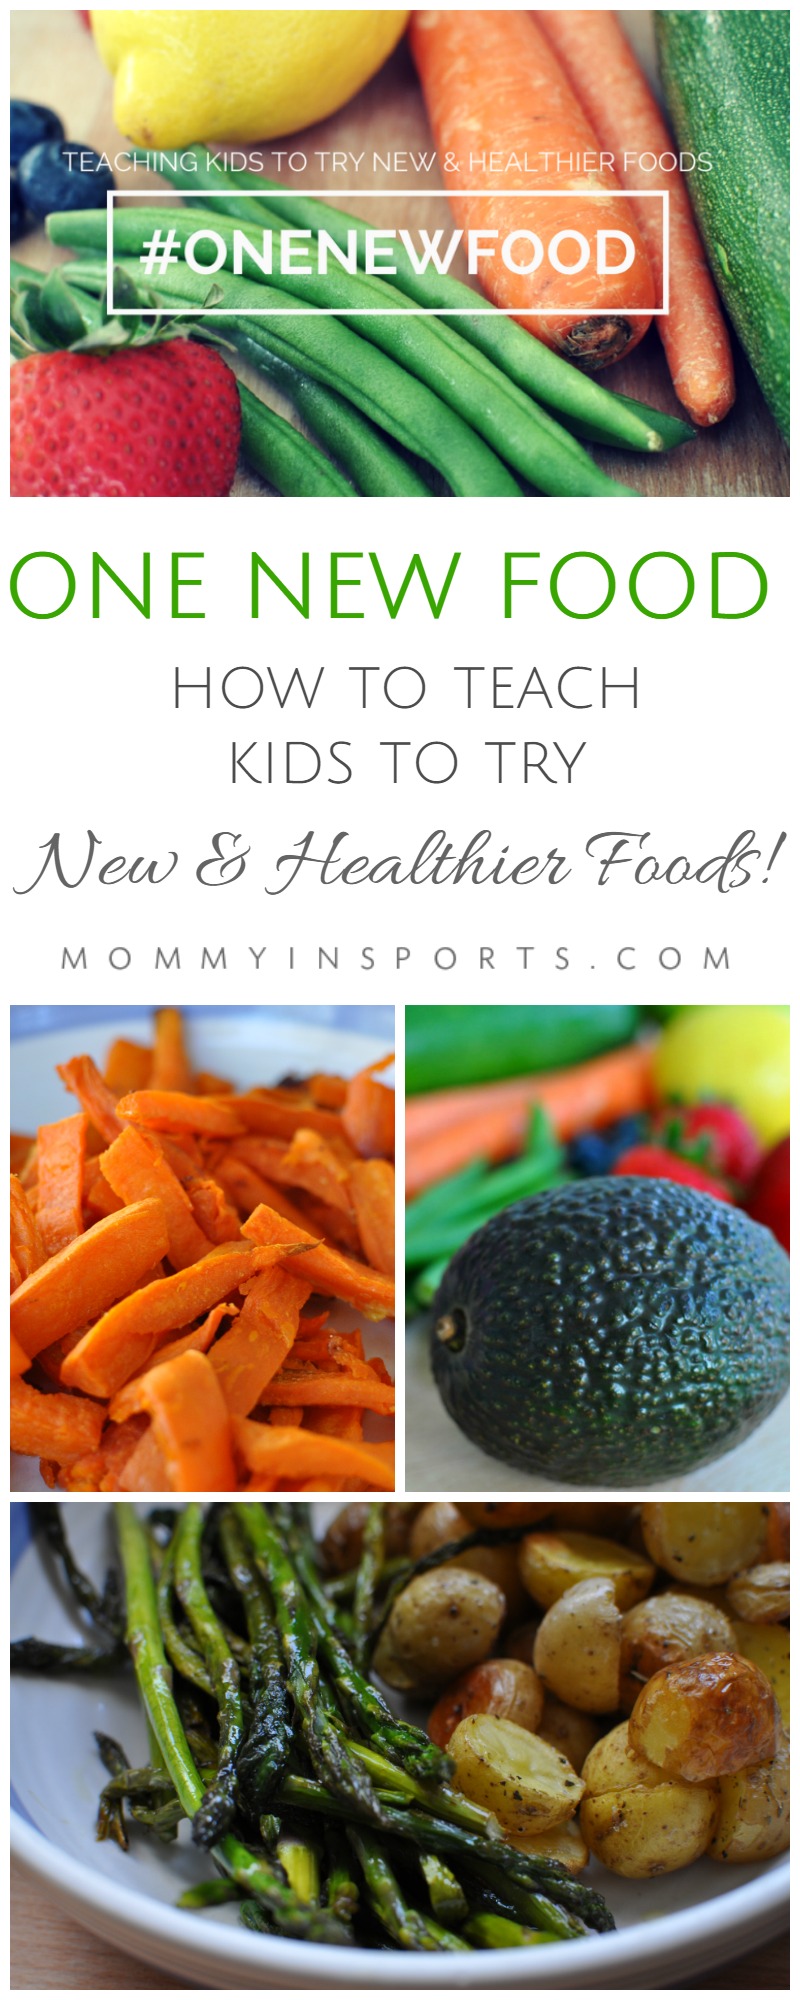 Do you struggle with meal times in your house? Most kids don't like new textures, sights, and smells on their plates. But trying this ONE NEW FOOD strategy really works. Do you need help with picky eaters? Start here!